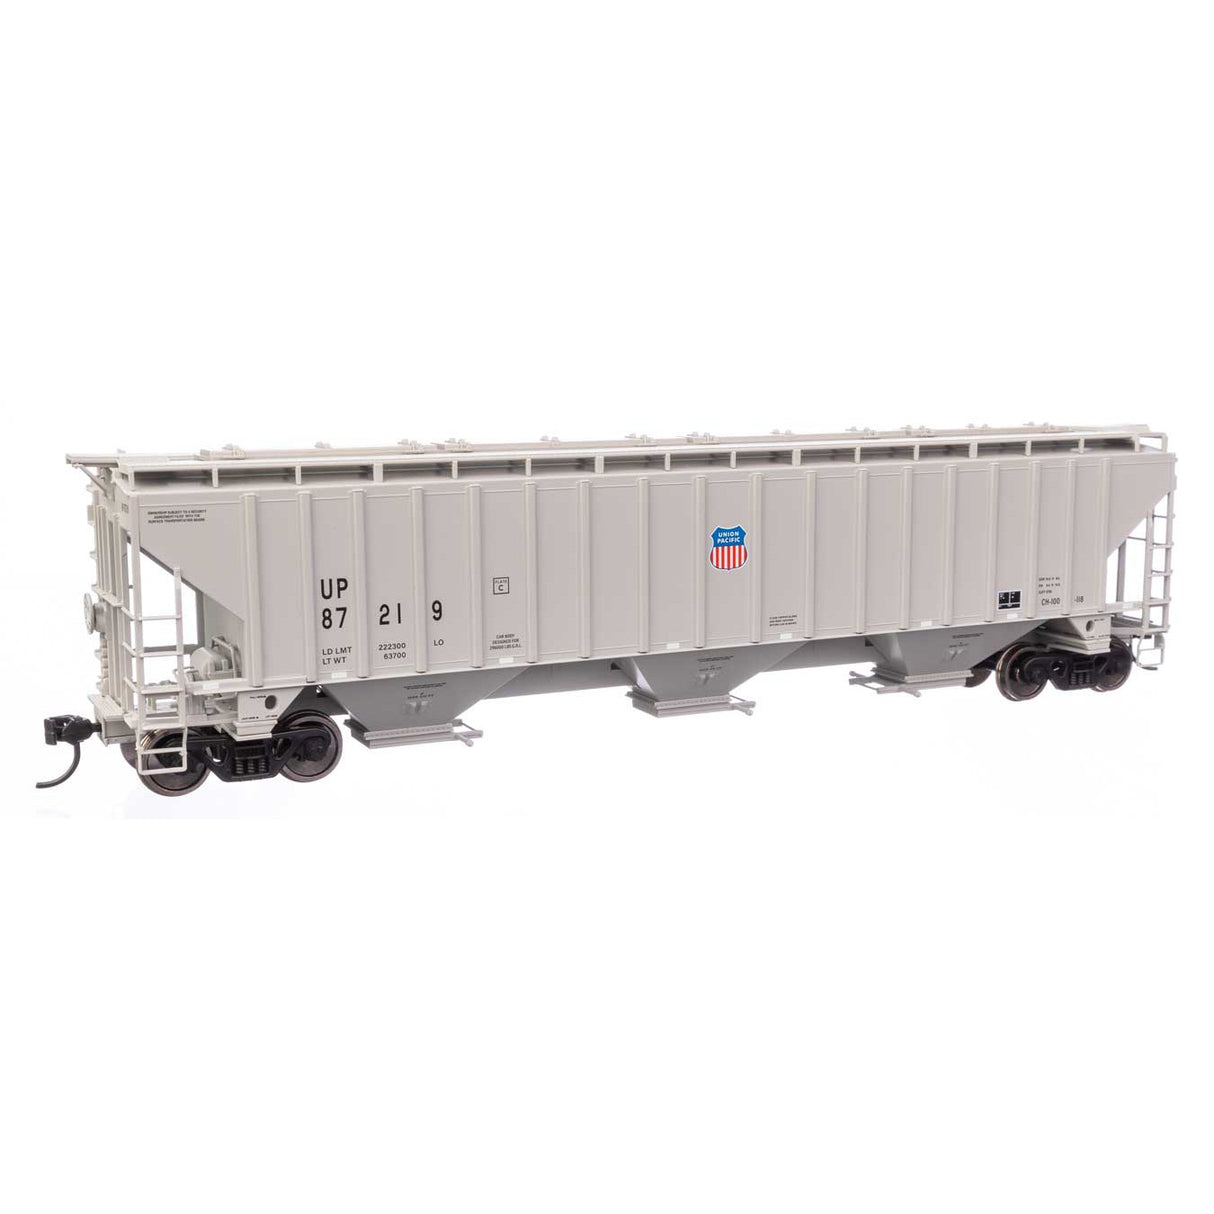 Walthers Mainline HO Scale Union Pacific 87219 Trinity 4750 Covered Hopper